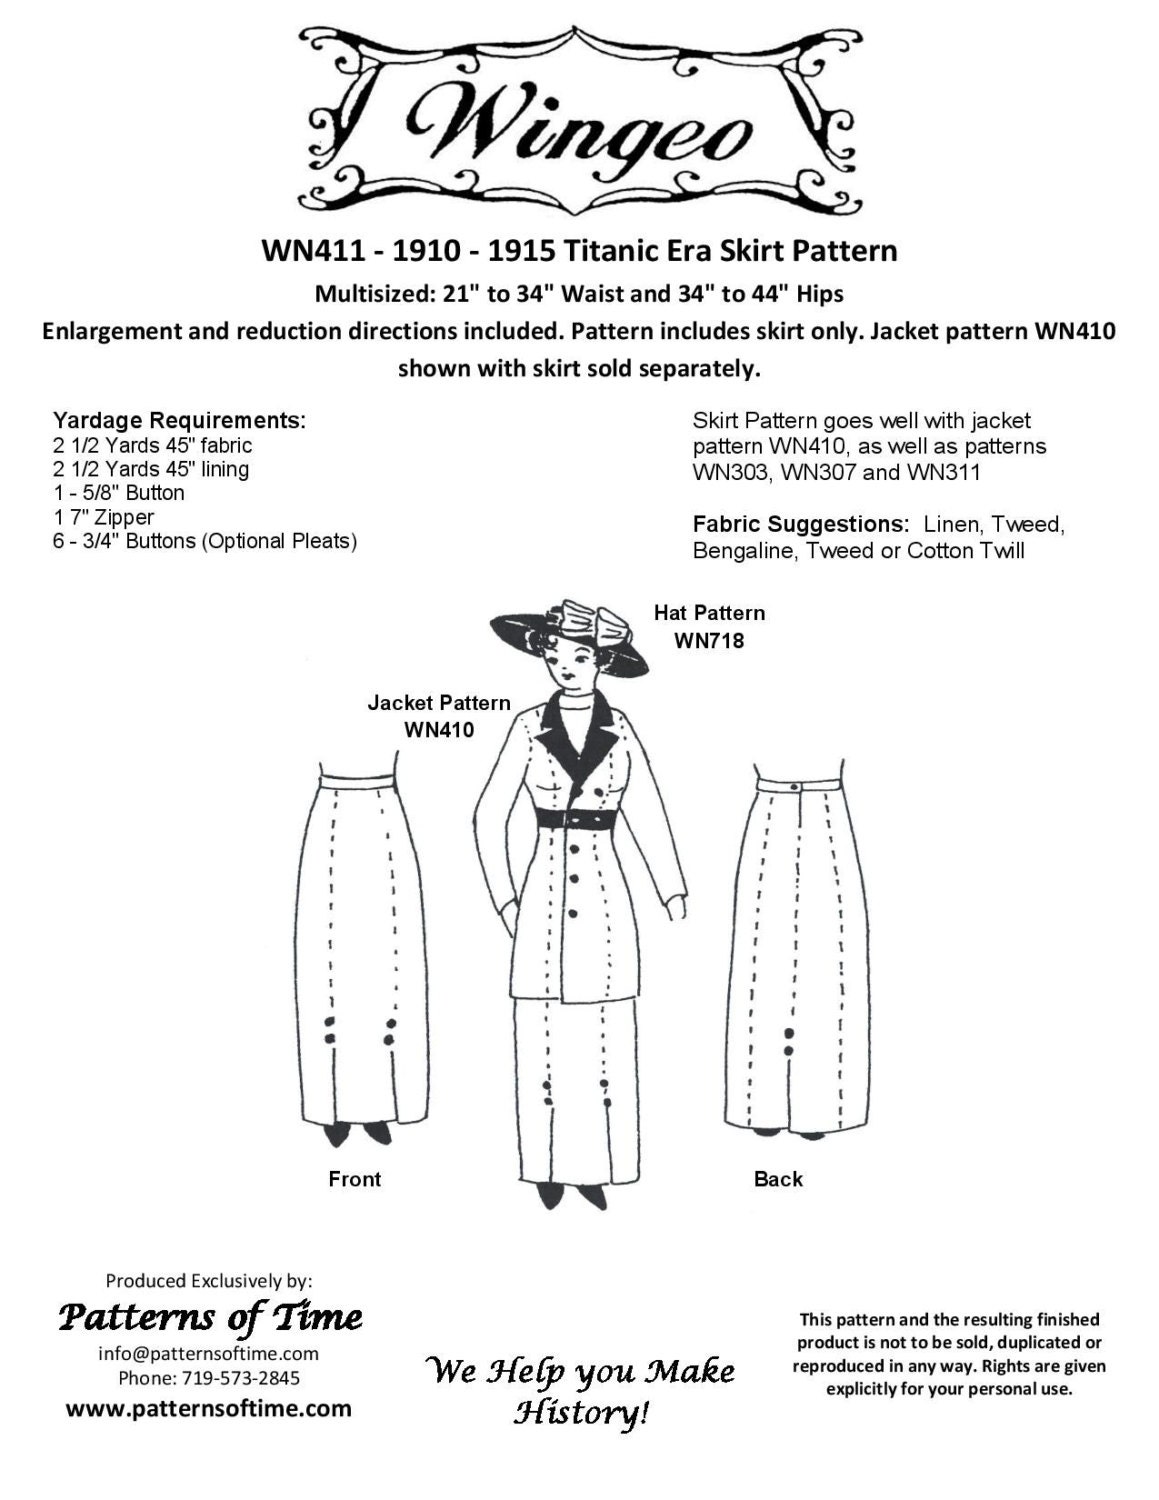 WN411 1910 1915 Skirt Sewing Pattern by Wingeo